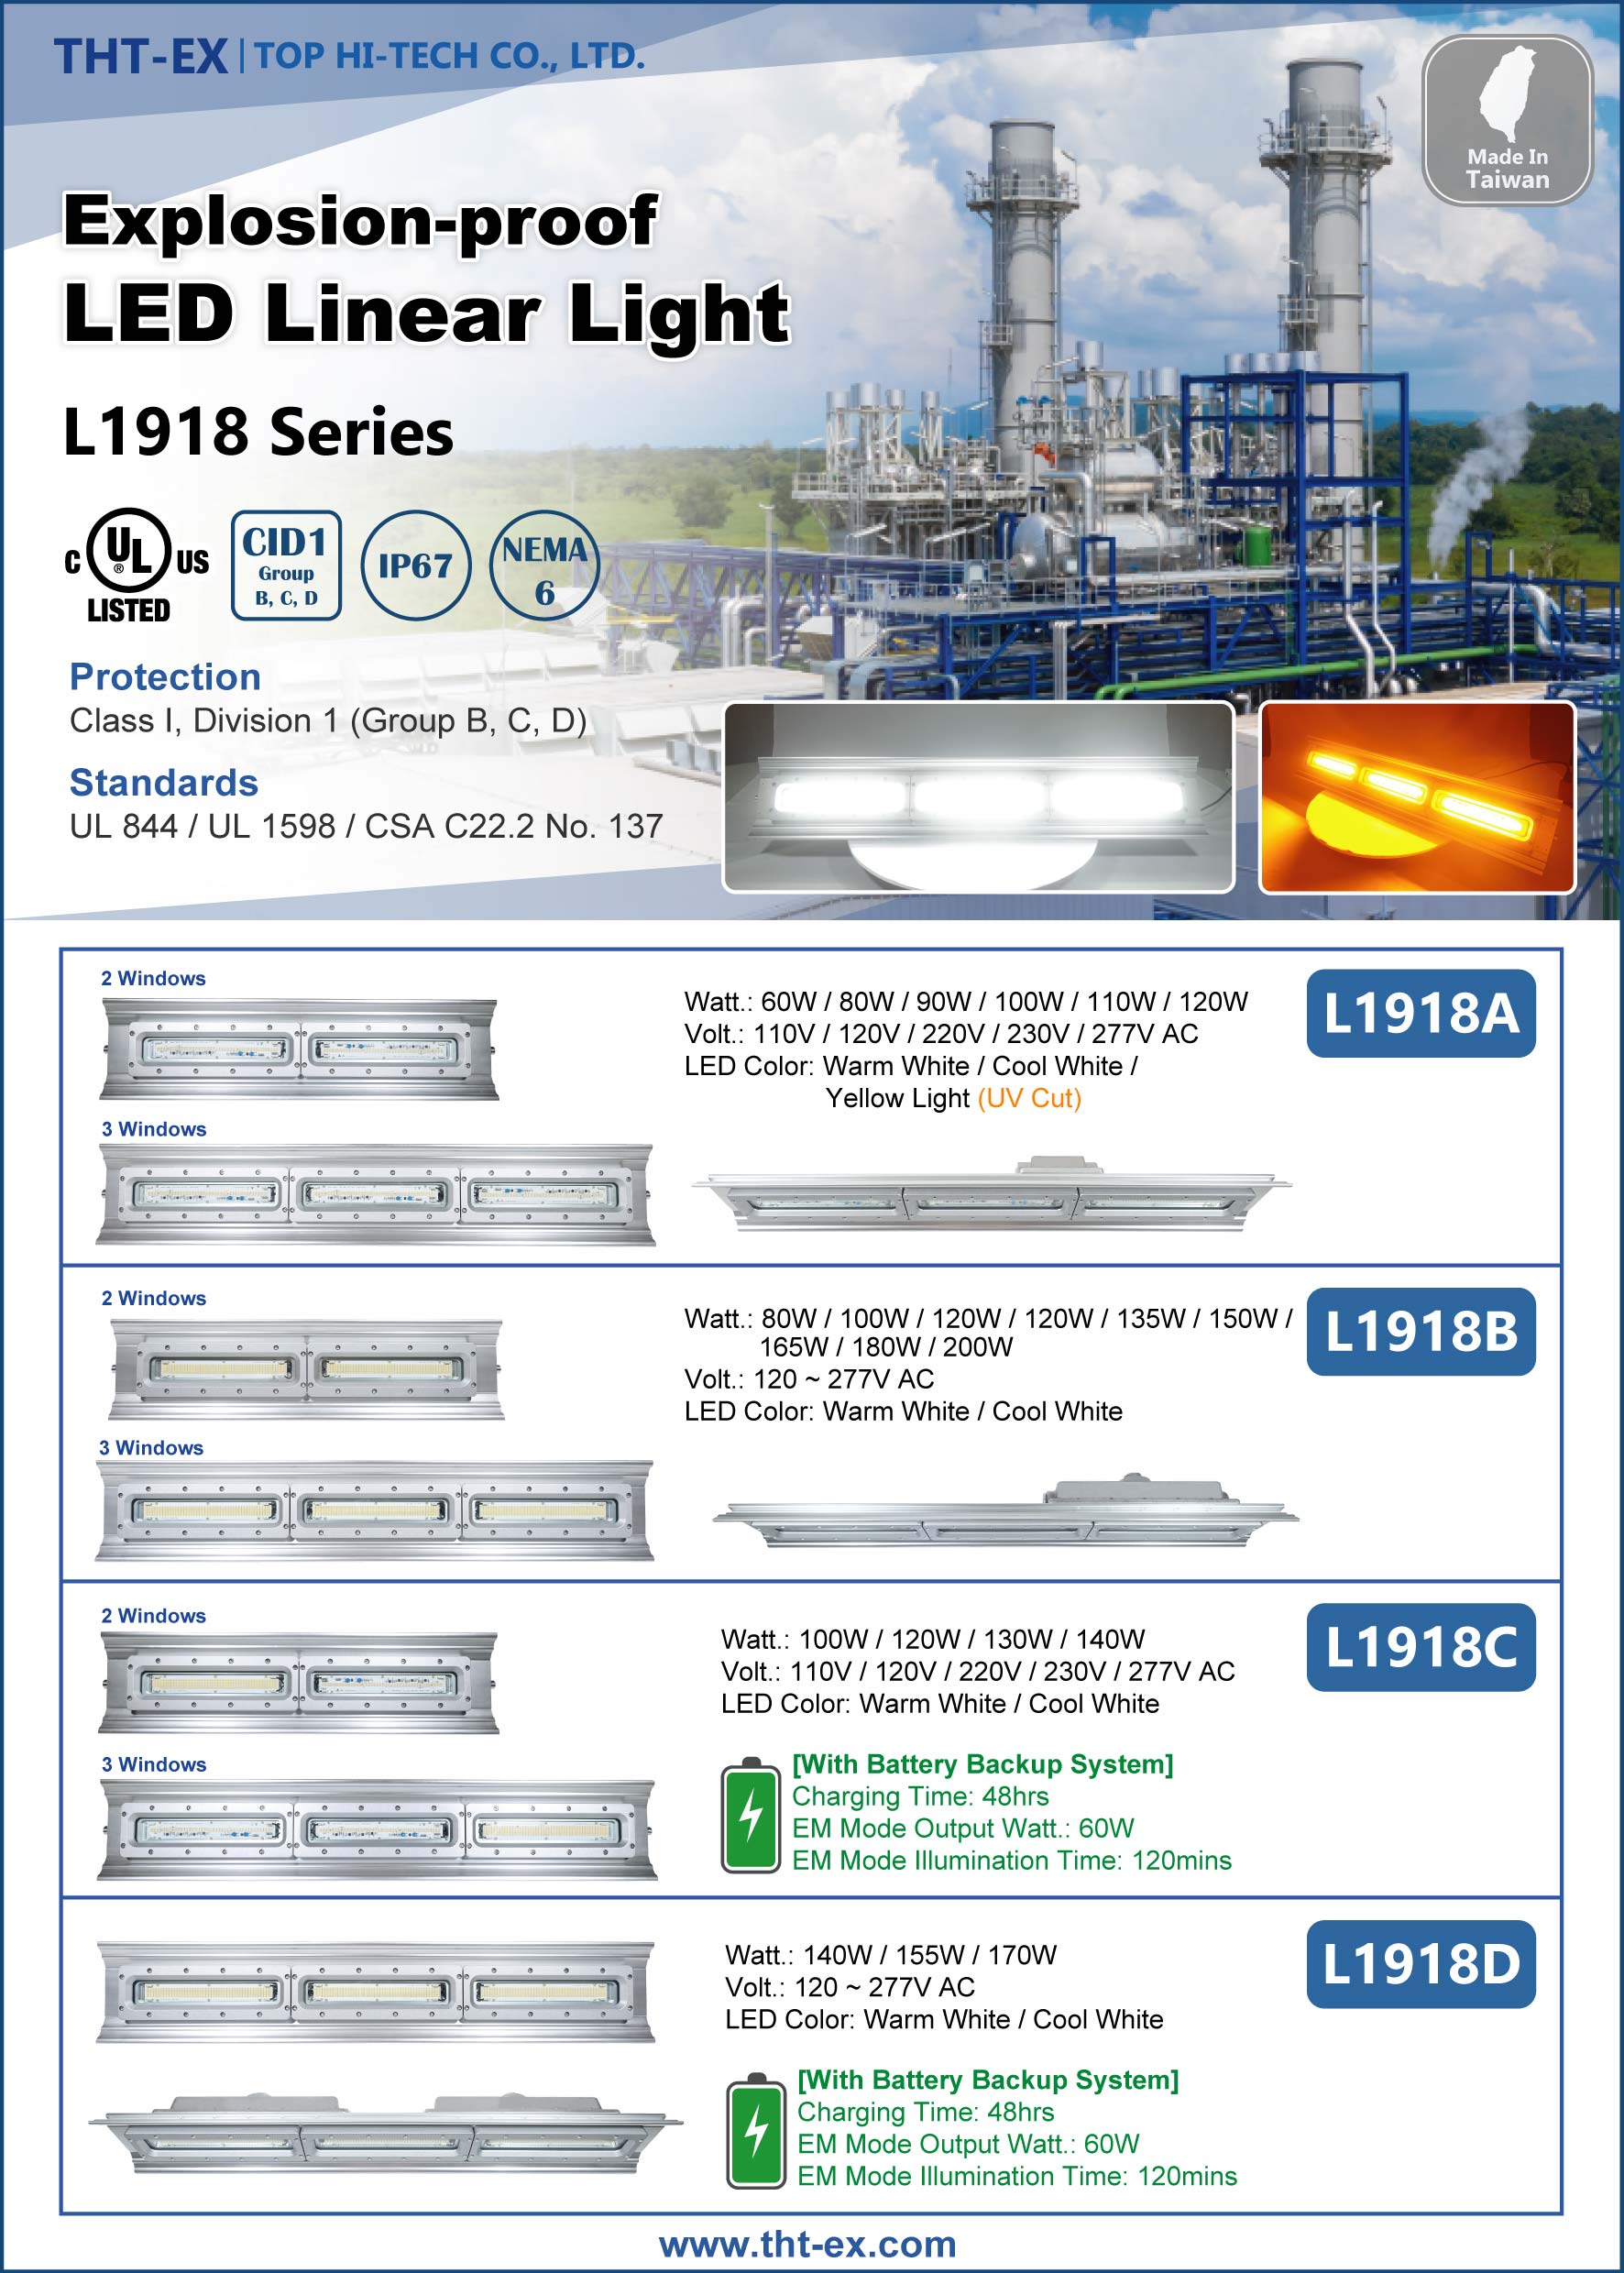 New Product Released! UL CID1 Explosion-proof LED Linear Light - Model L1918 Series